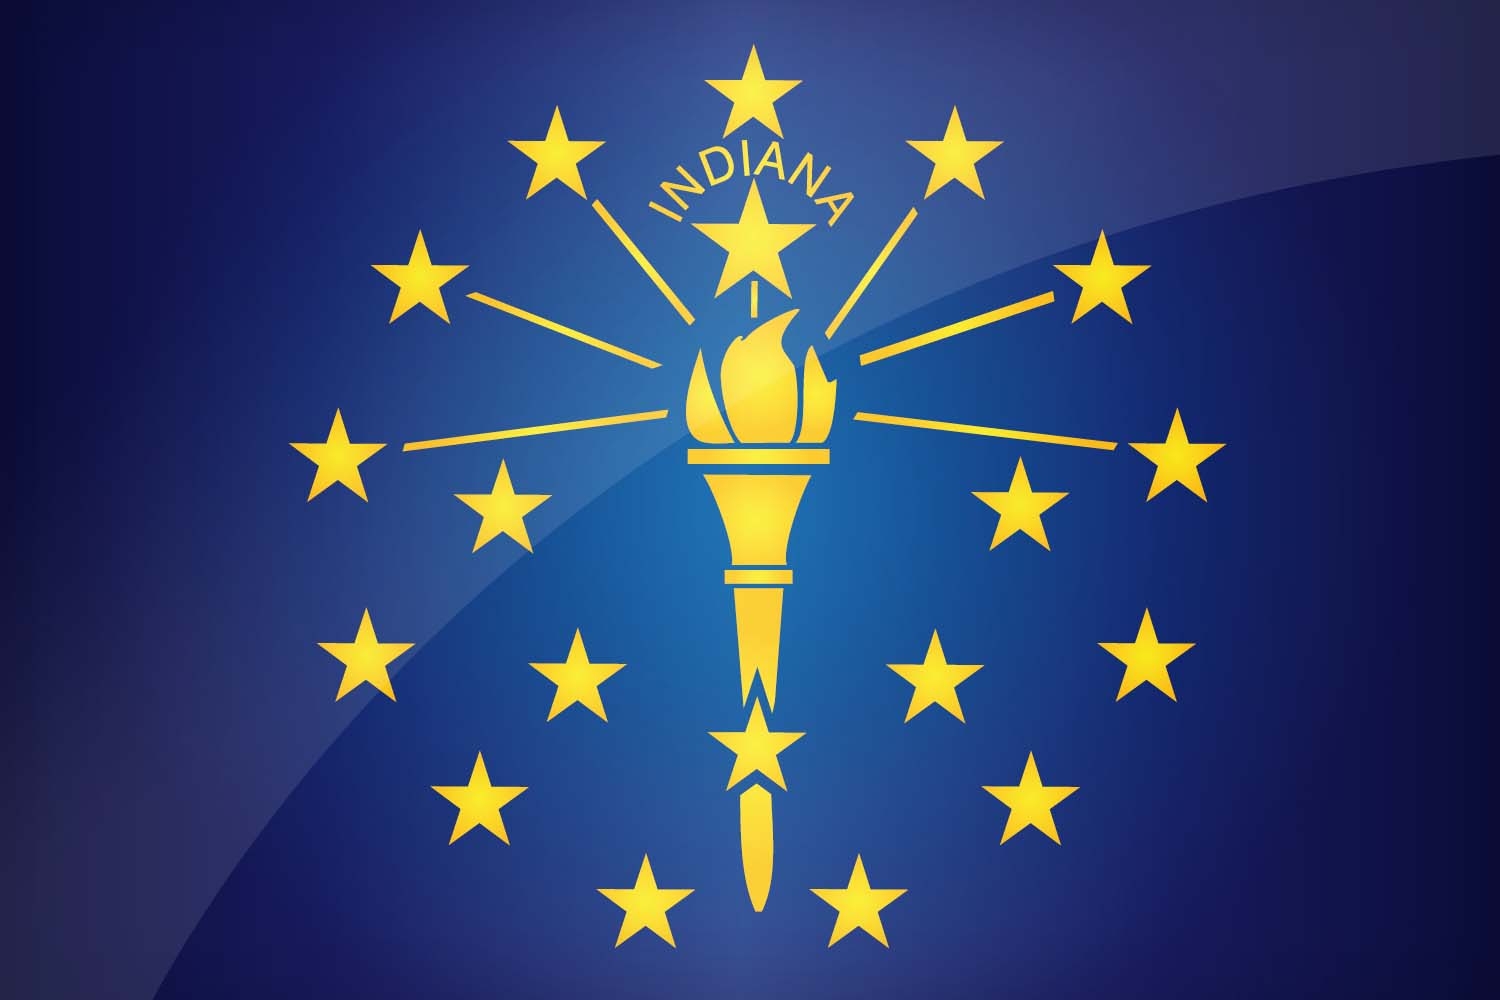 Flag Of Indiana Download The Official Indiana s Flag